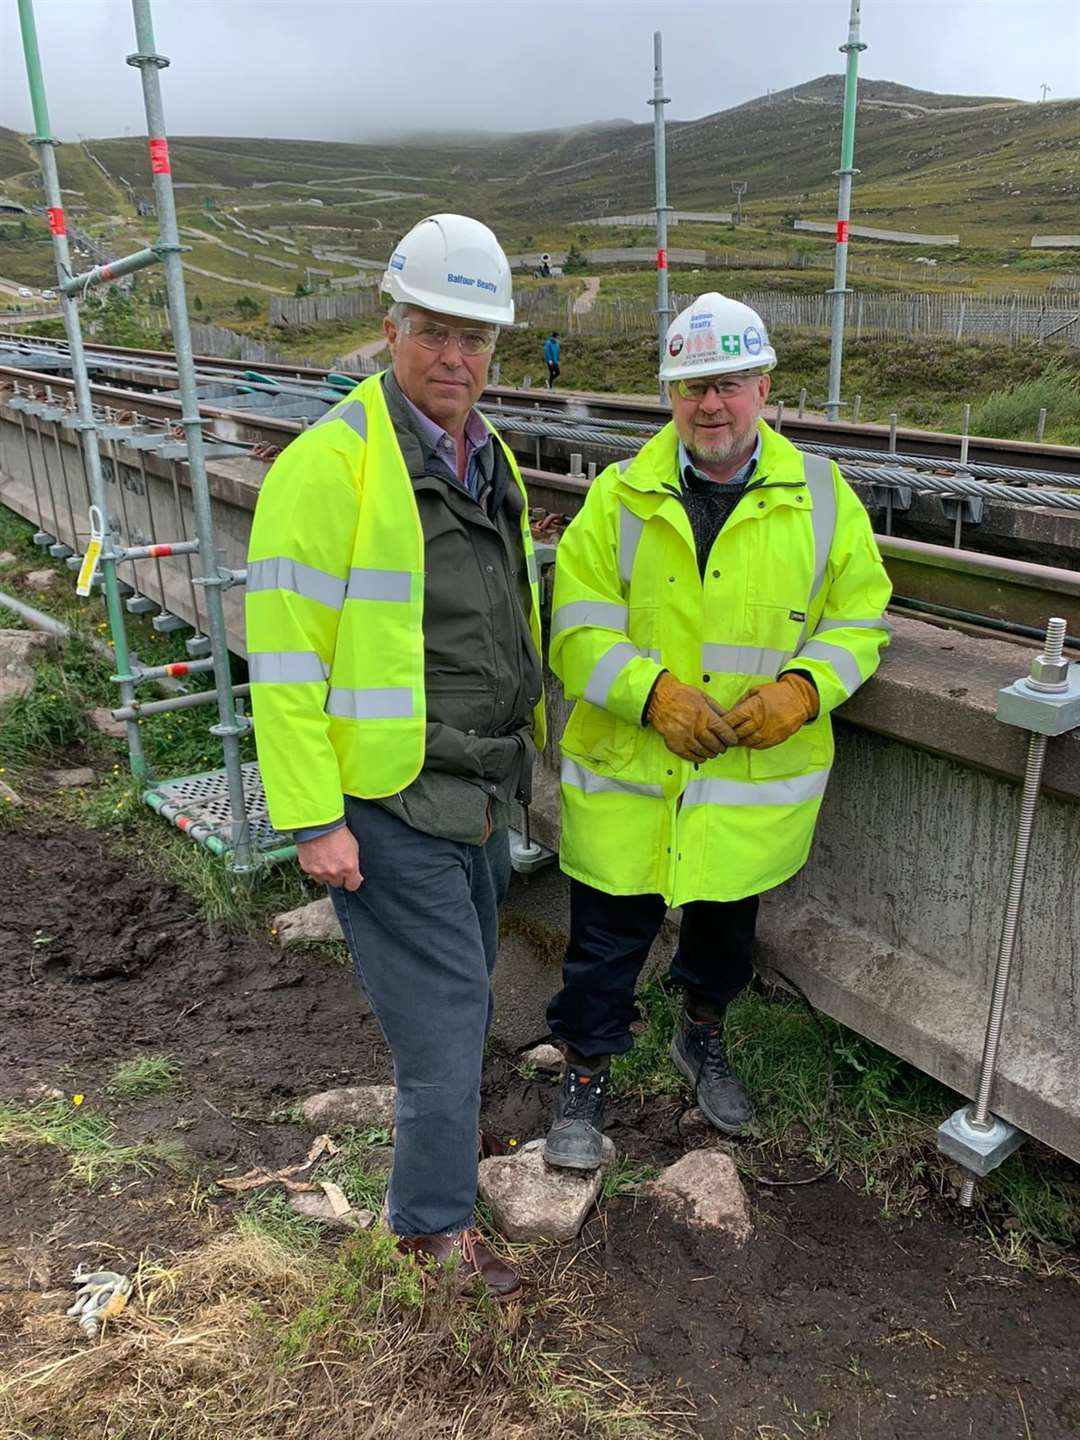 Highlands MSP Edward Mountain and Ken Brown, Balfour Beatty project manager, at Cairngorm Mountain earlier today.